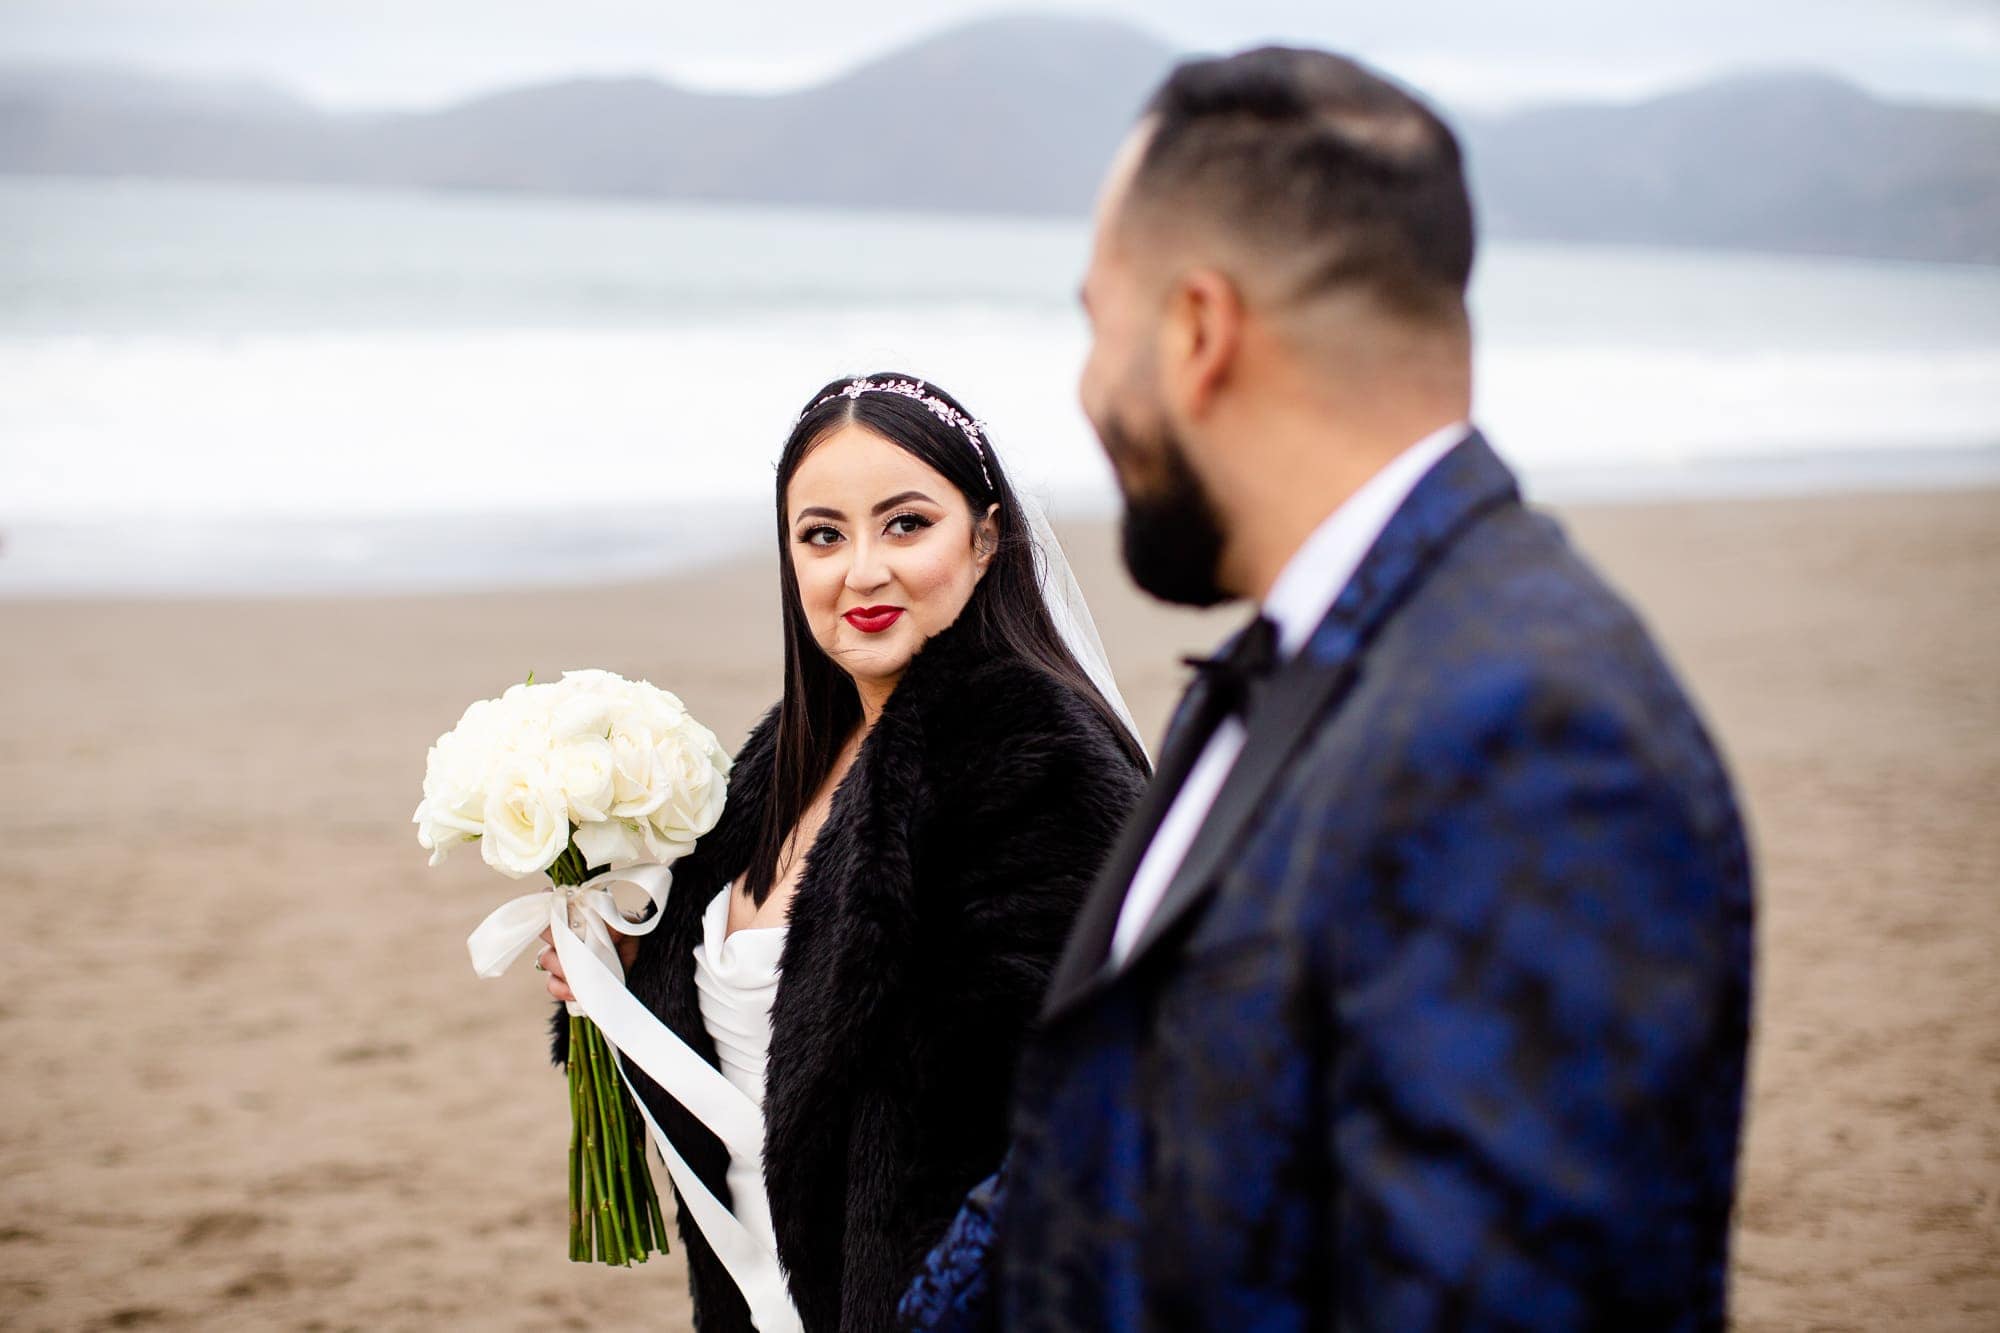 Bride looking at the groom while holding her bouquet and walking on the beach